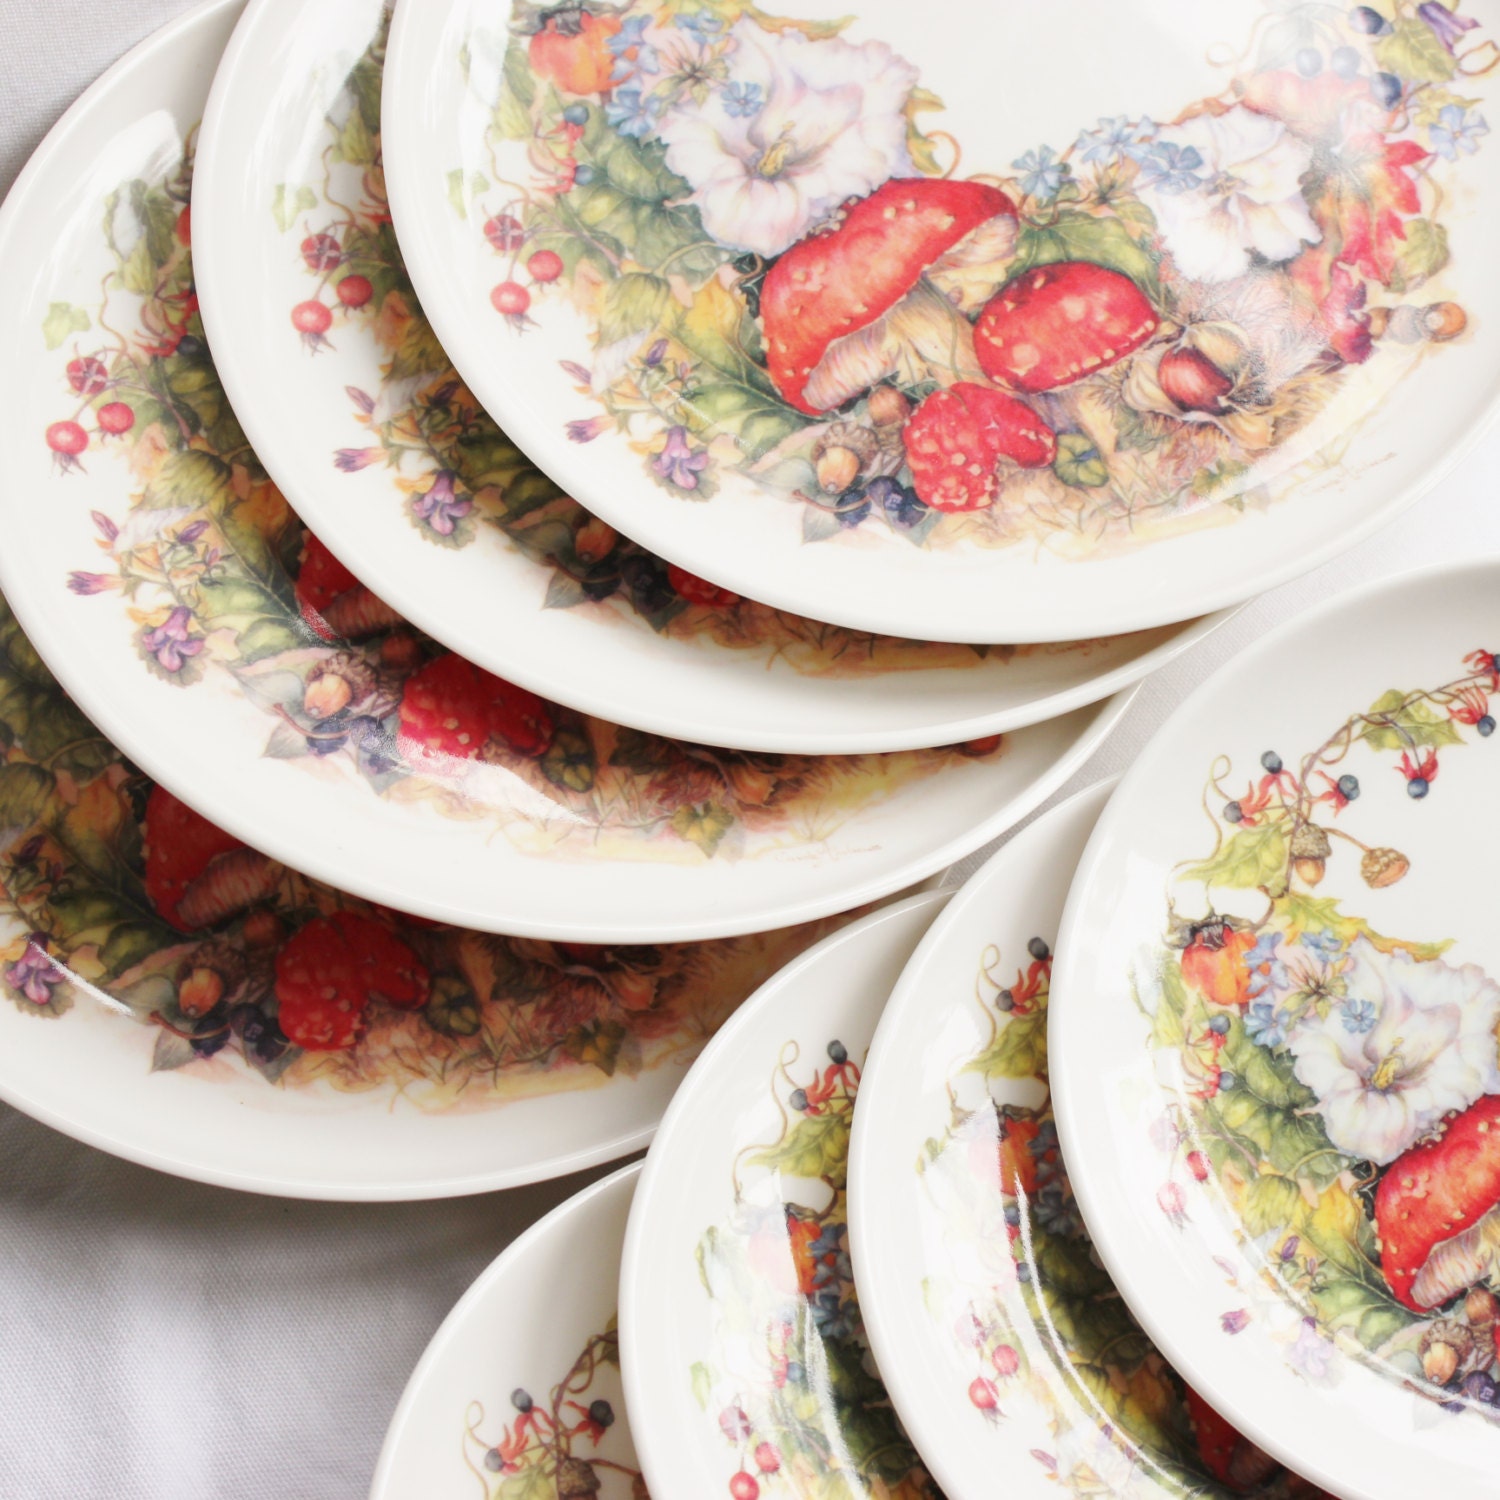 Funky Toadstool and Flower Melamine Camping or Picnic, 8 Plate Set - TheHattersTeaParty